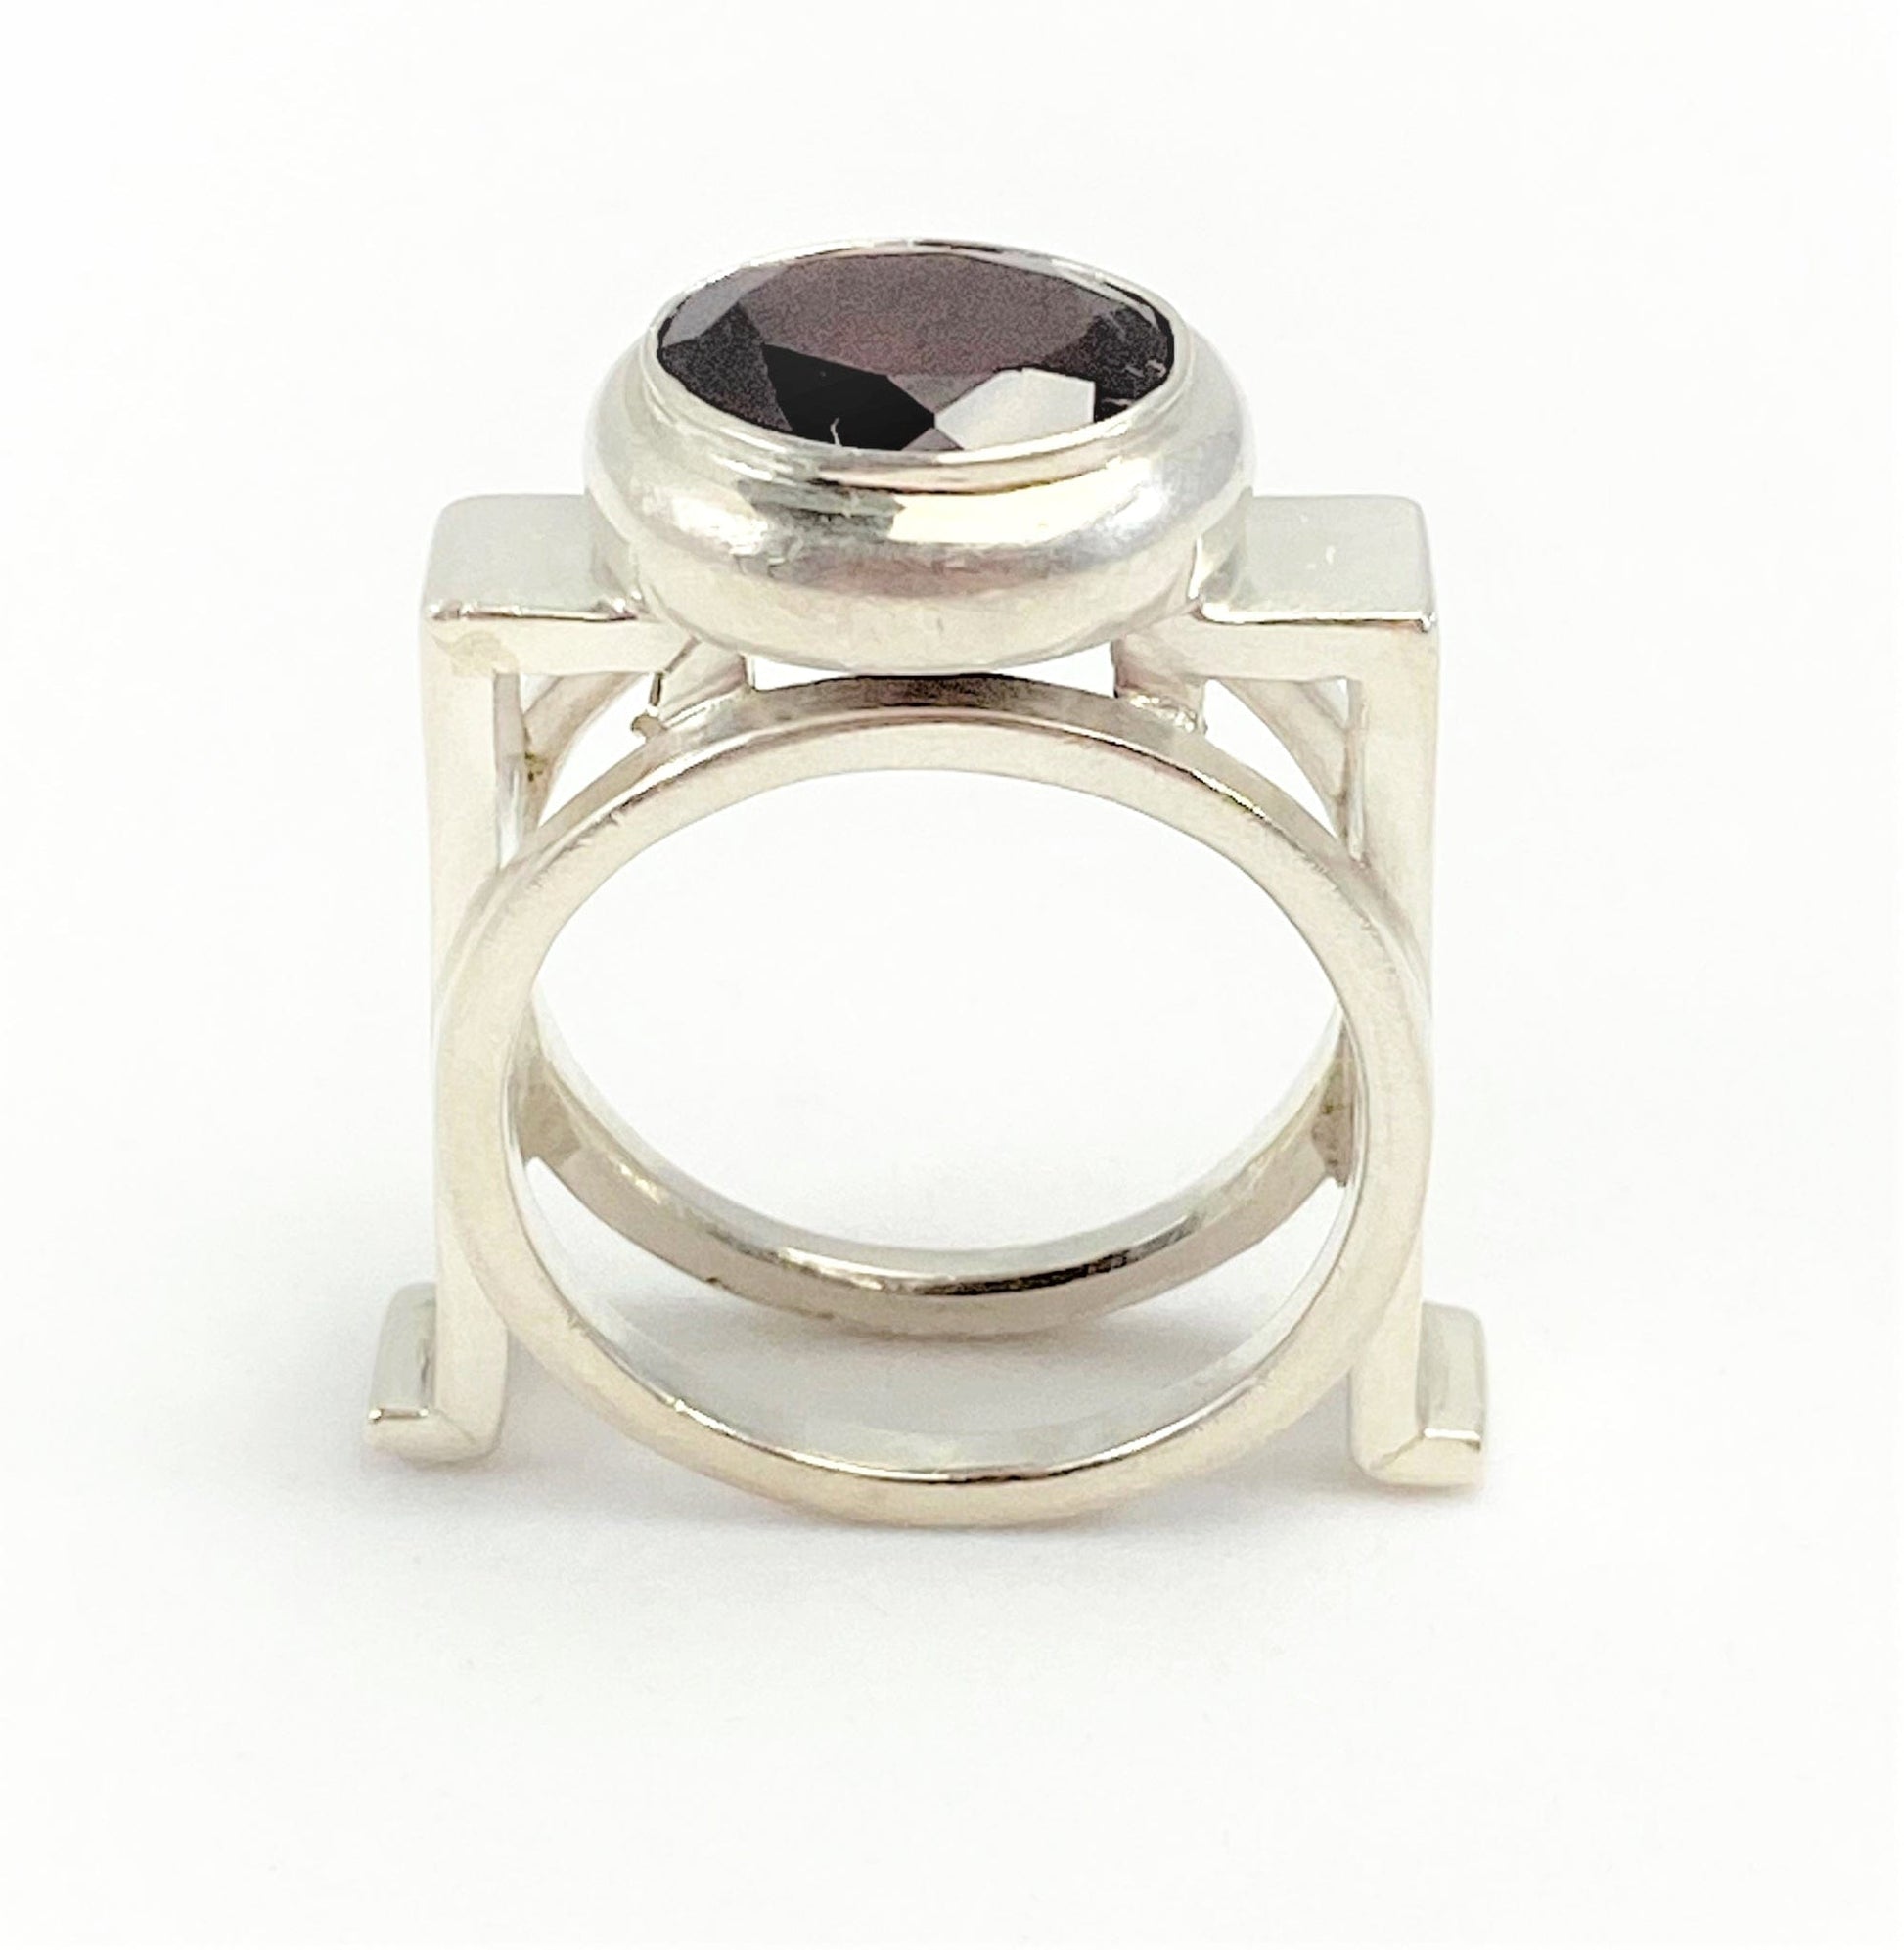 Estate Silver Jewelry Vintage Estate Sterling Silver & Garnet Abstract Modernist Square Cocktail Ring